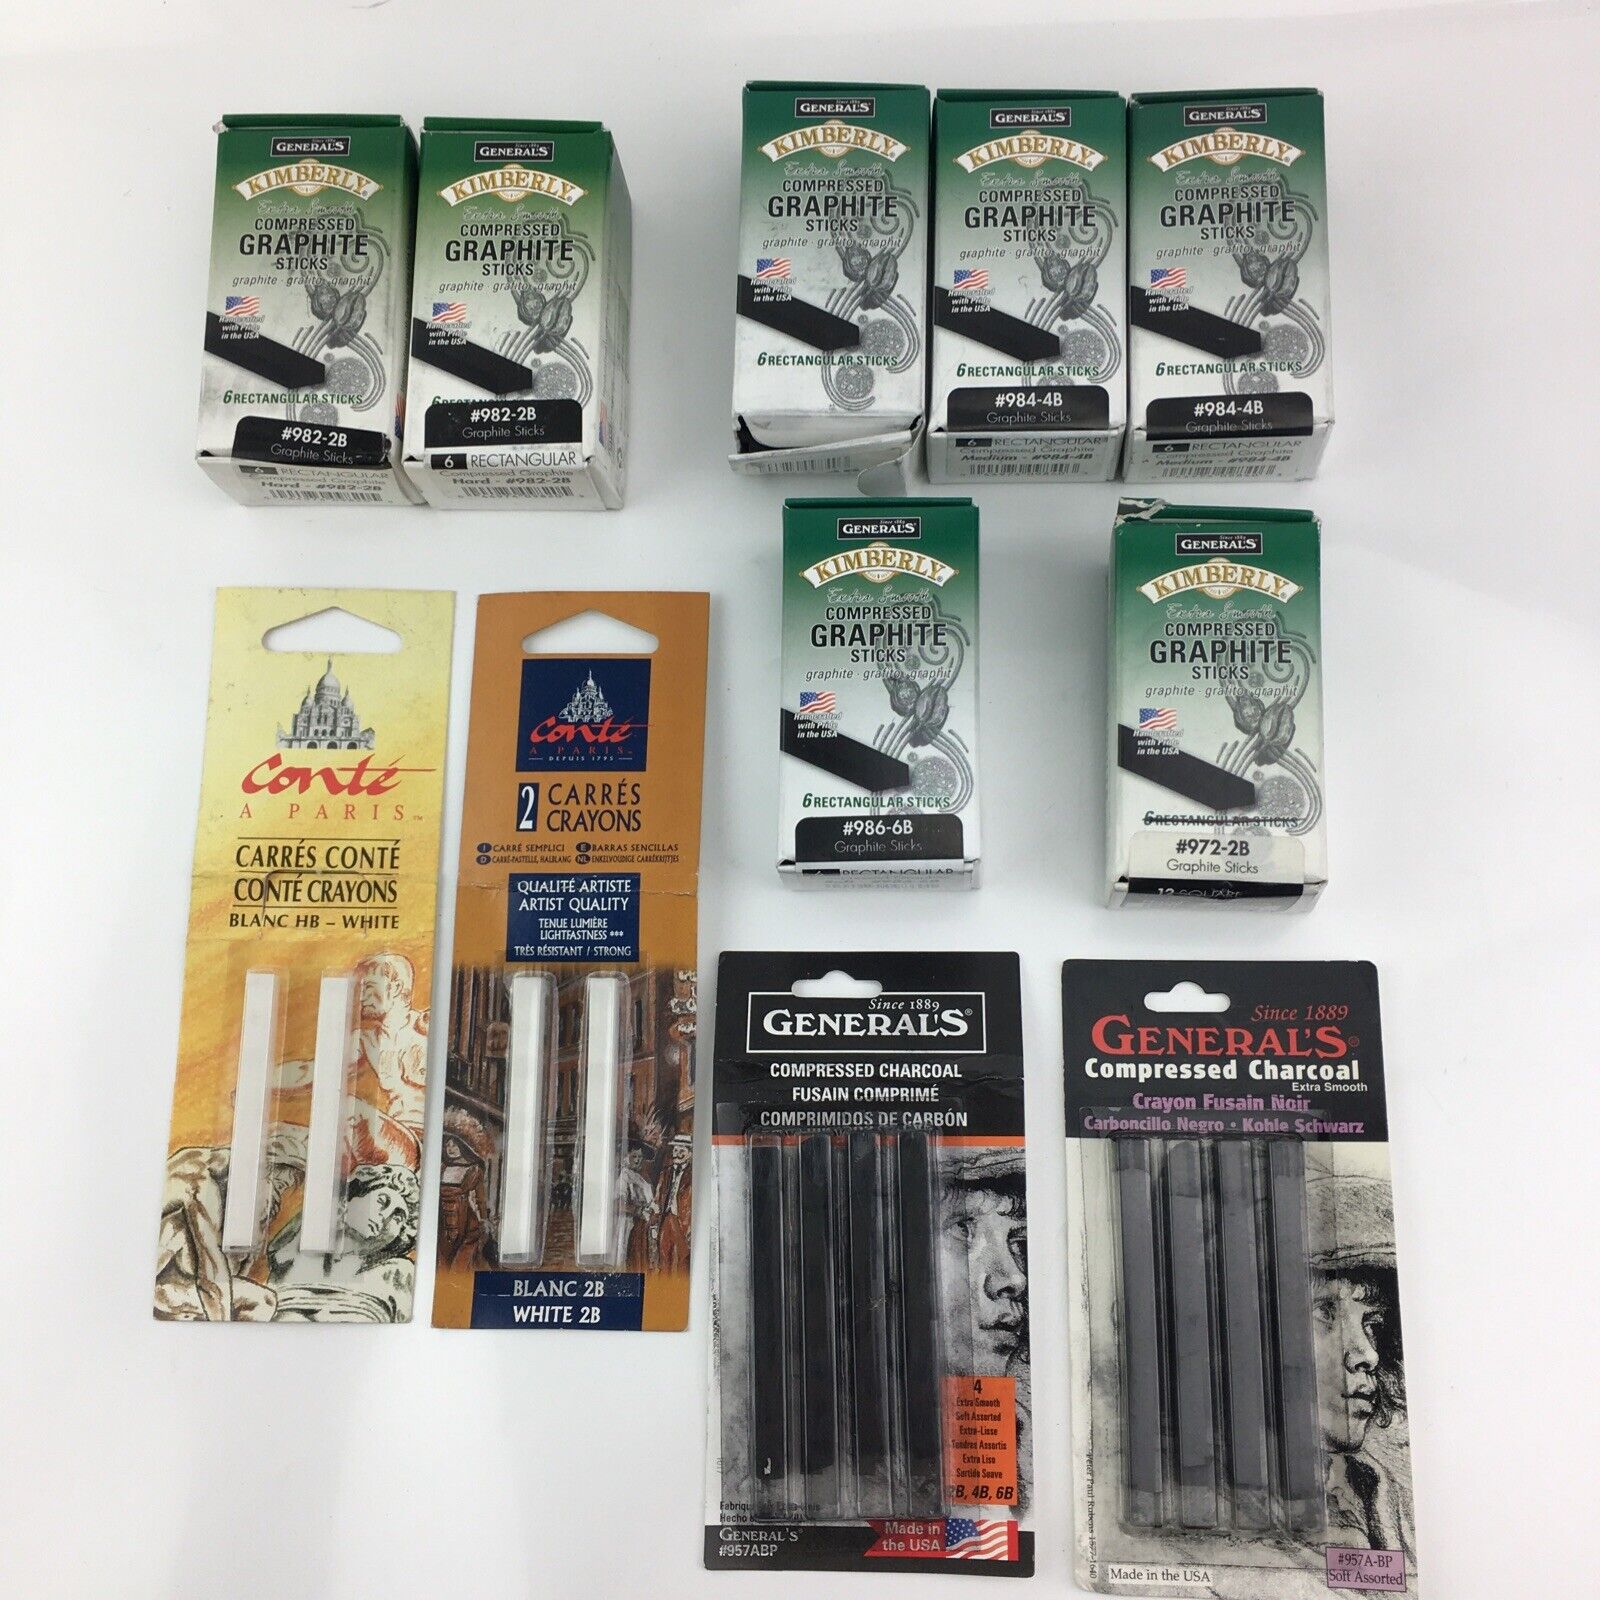 Big Lot of General's Kimberly Compressed Graphite Square Art Sticks Variety